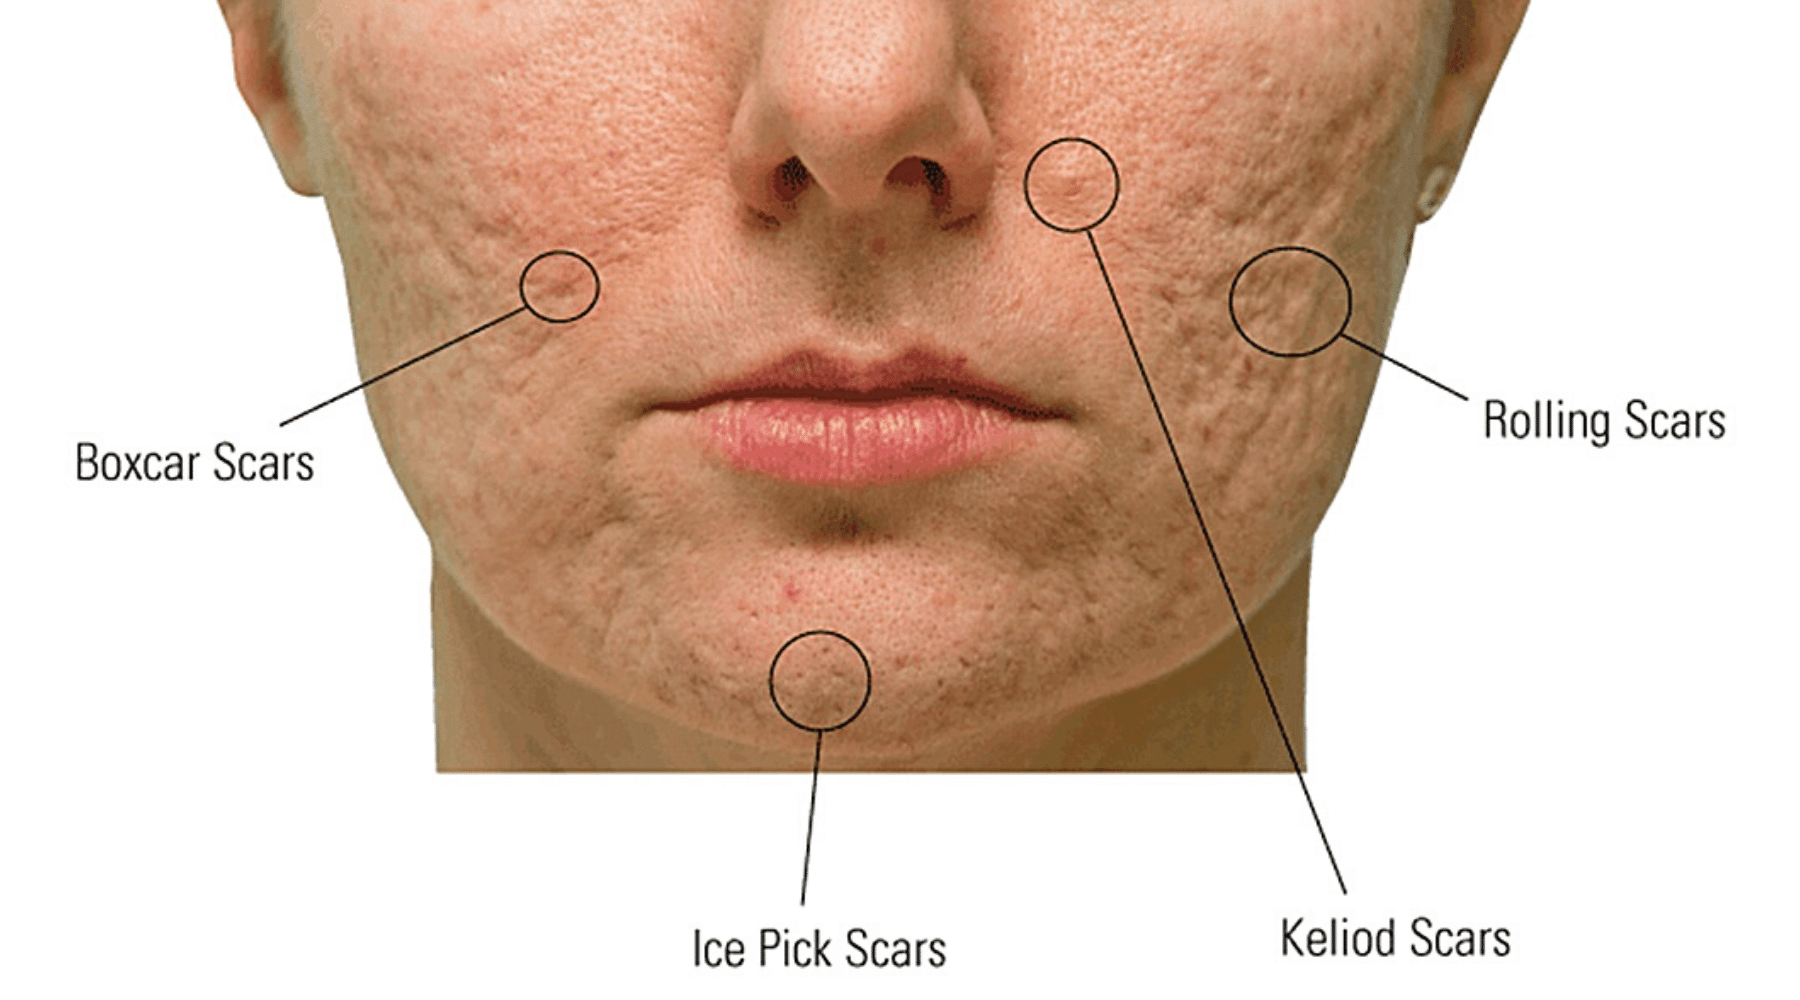 TYPE OF ACNE SCARS